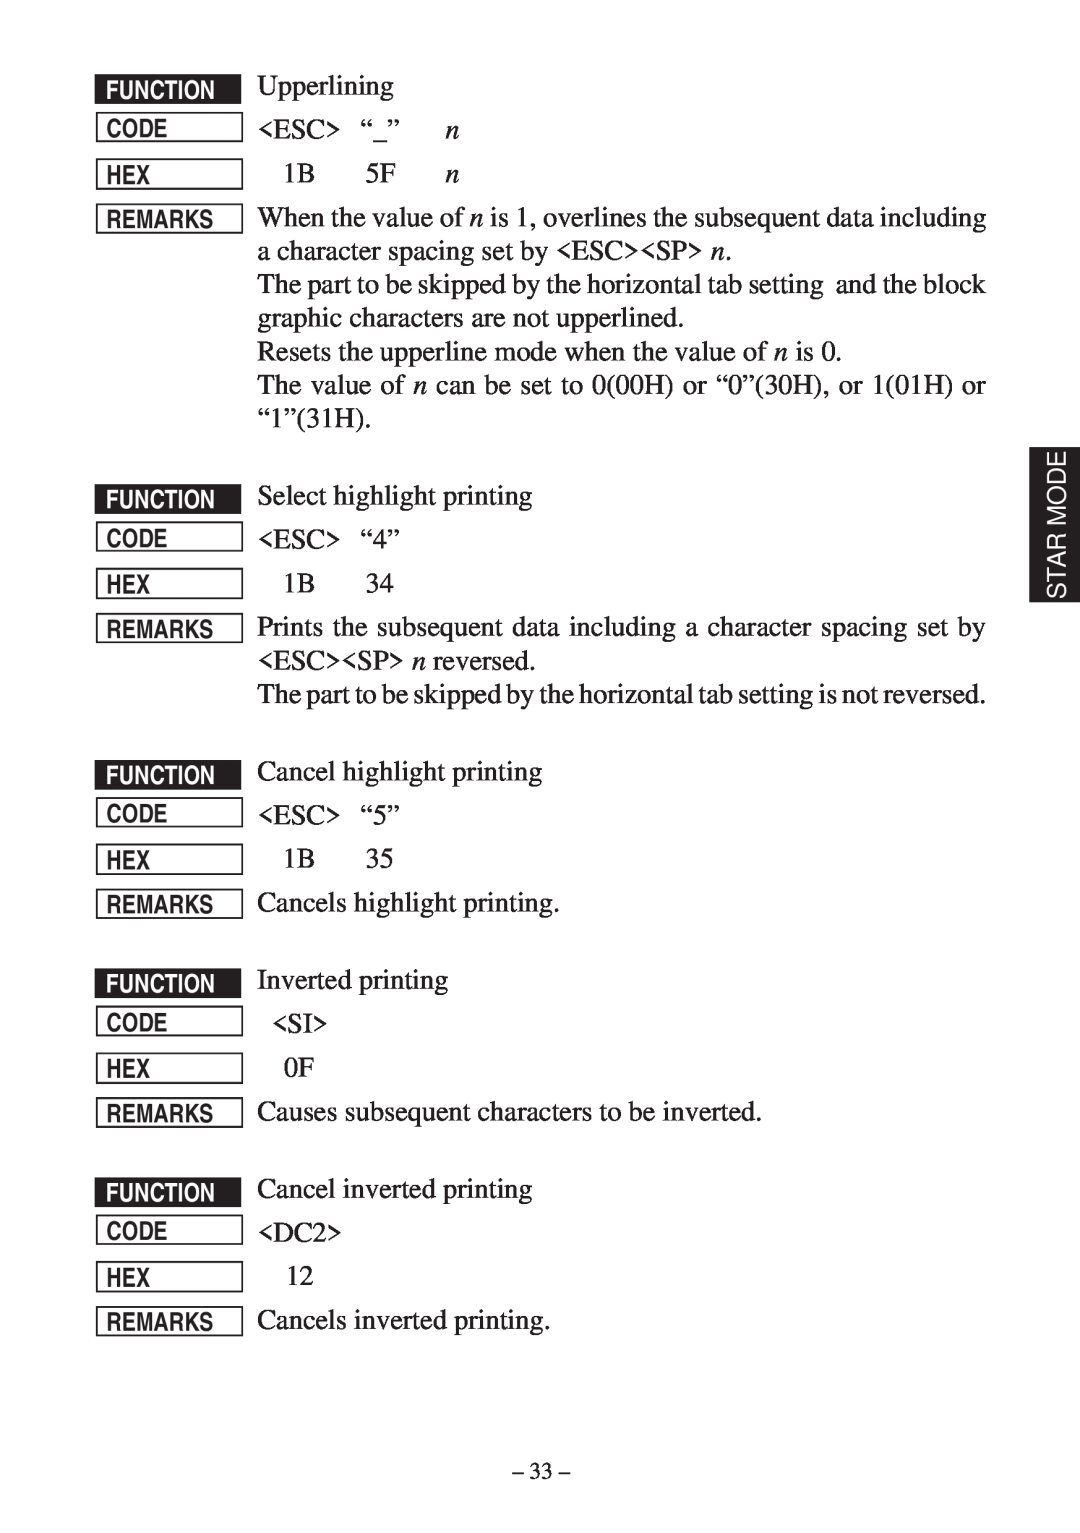 Star Micronics RS232 manual The part to be skipped by the horizontal tab setting is not reversed 